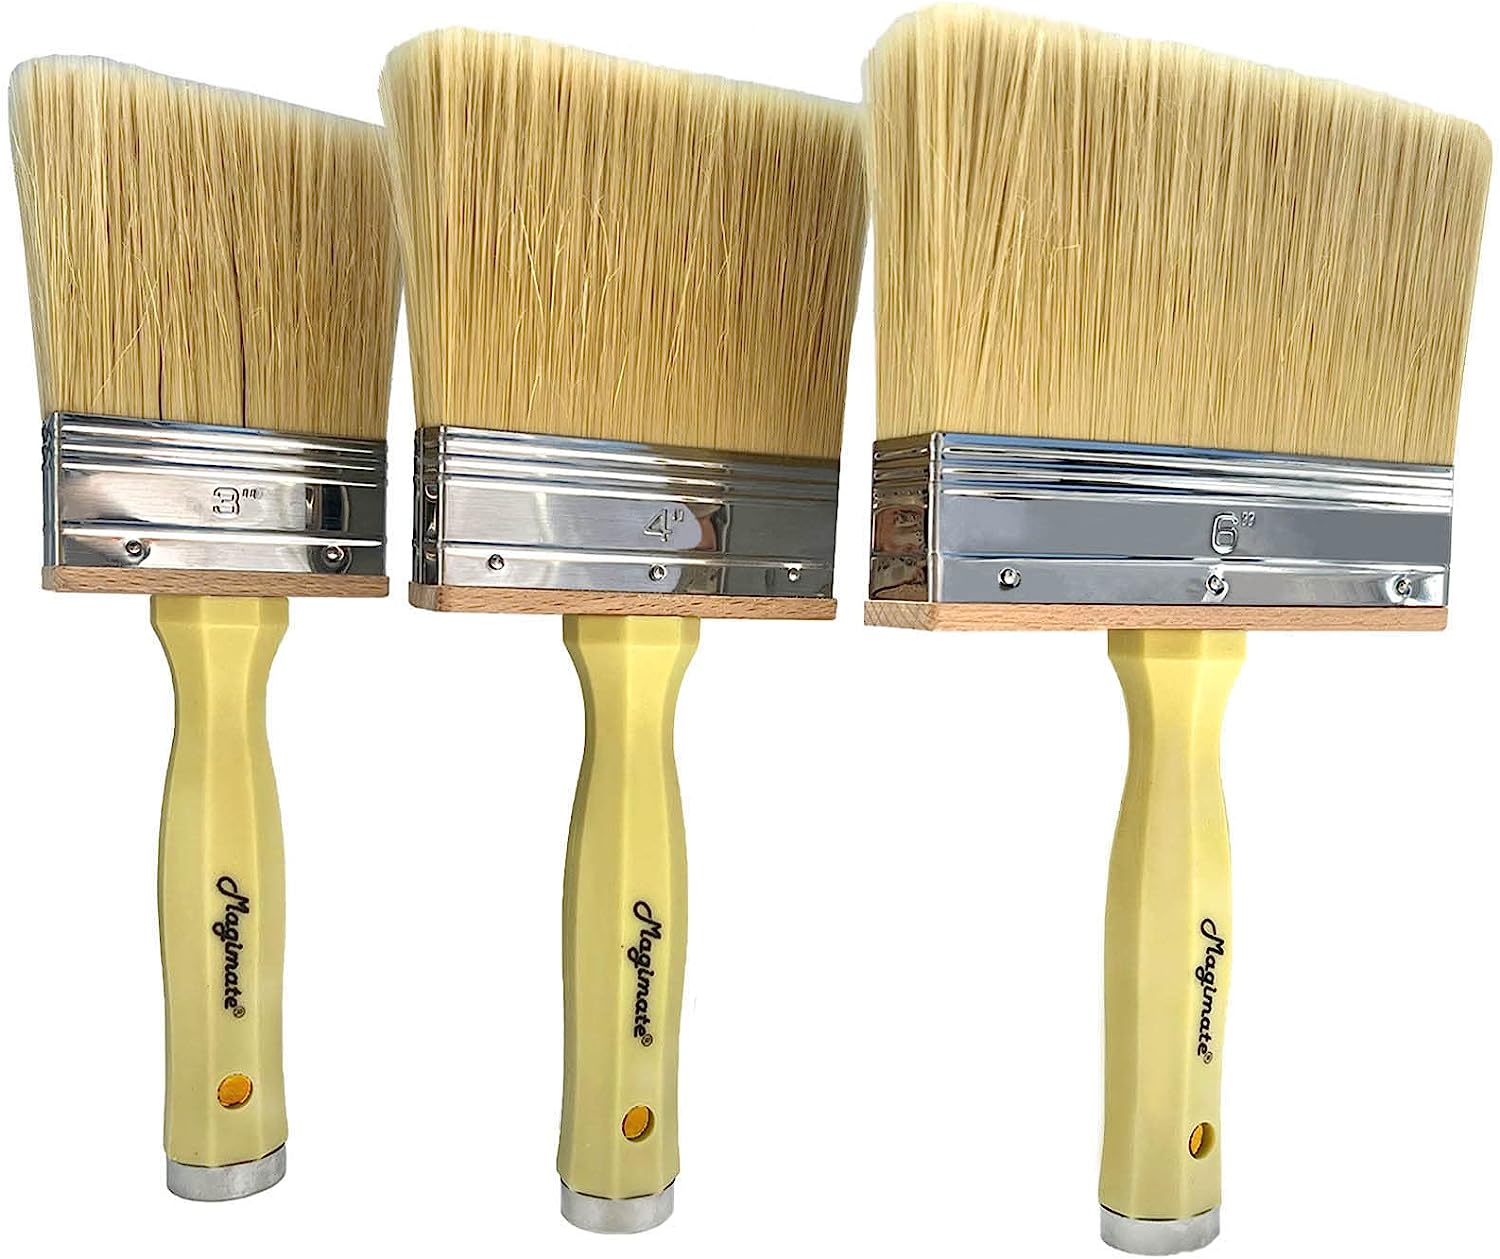 Magimate Deck Stain and Sealer Block Paint Brushes on [...]